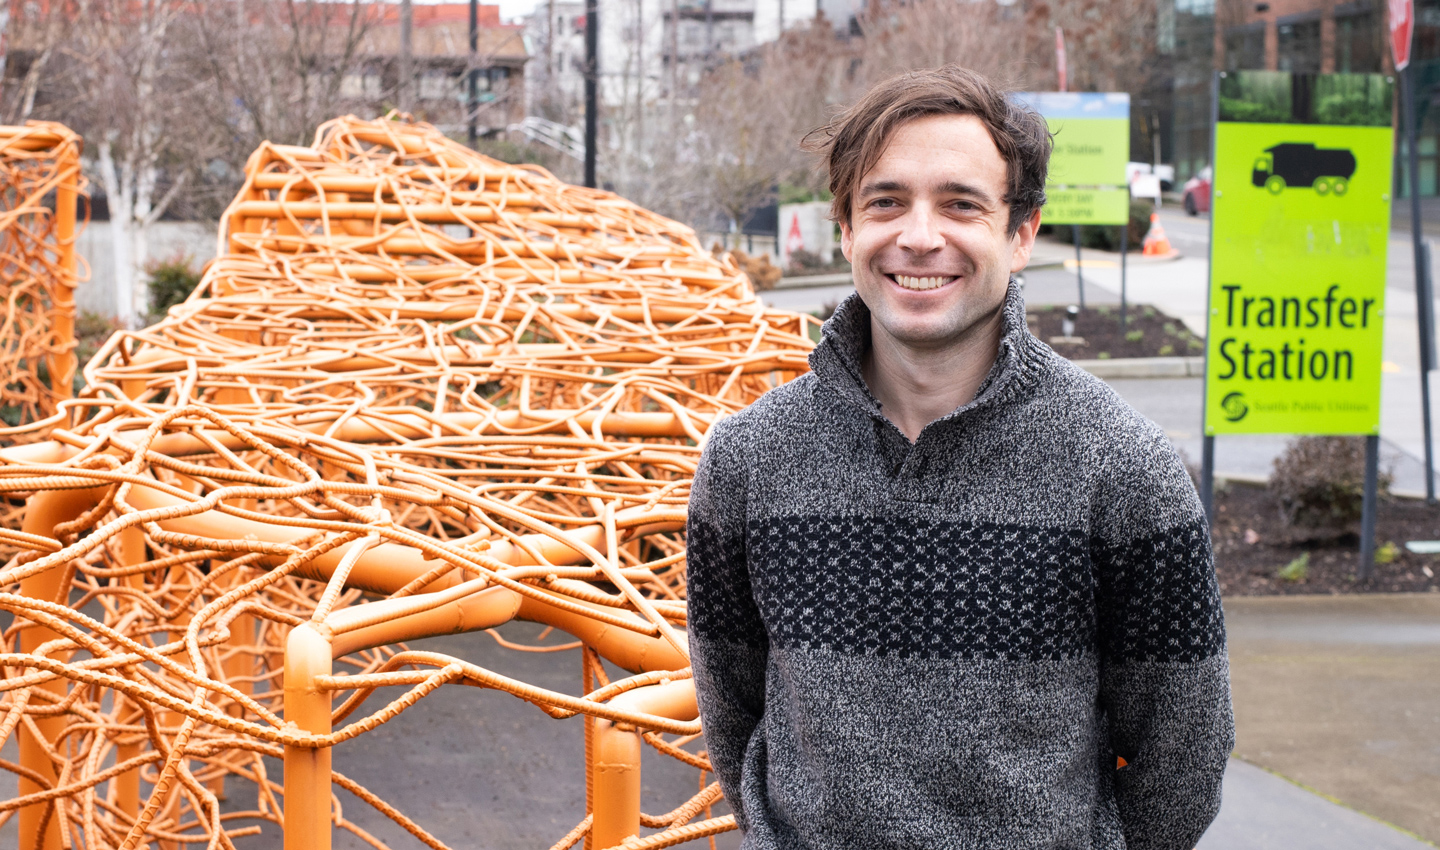 Nick Logler in front of a sign and sculpture at a transfer station